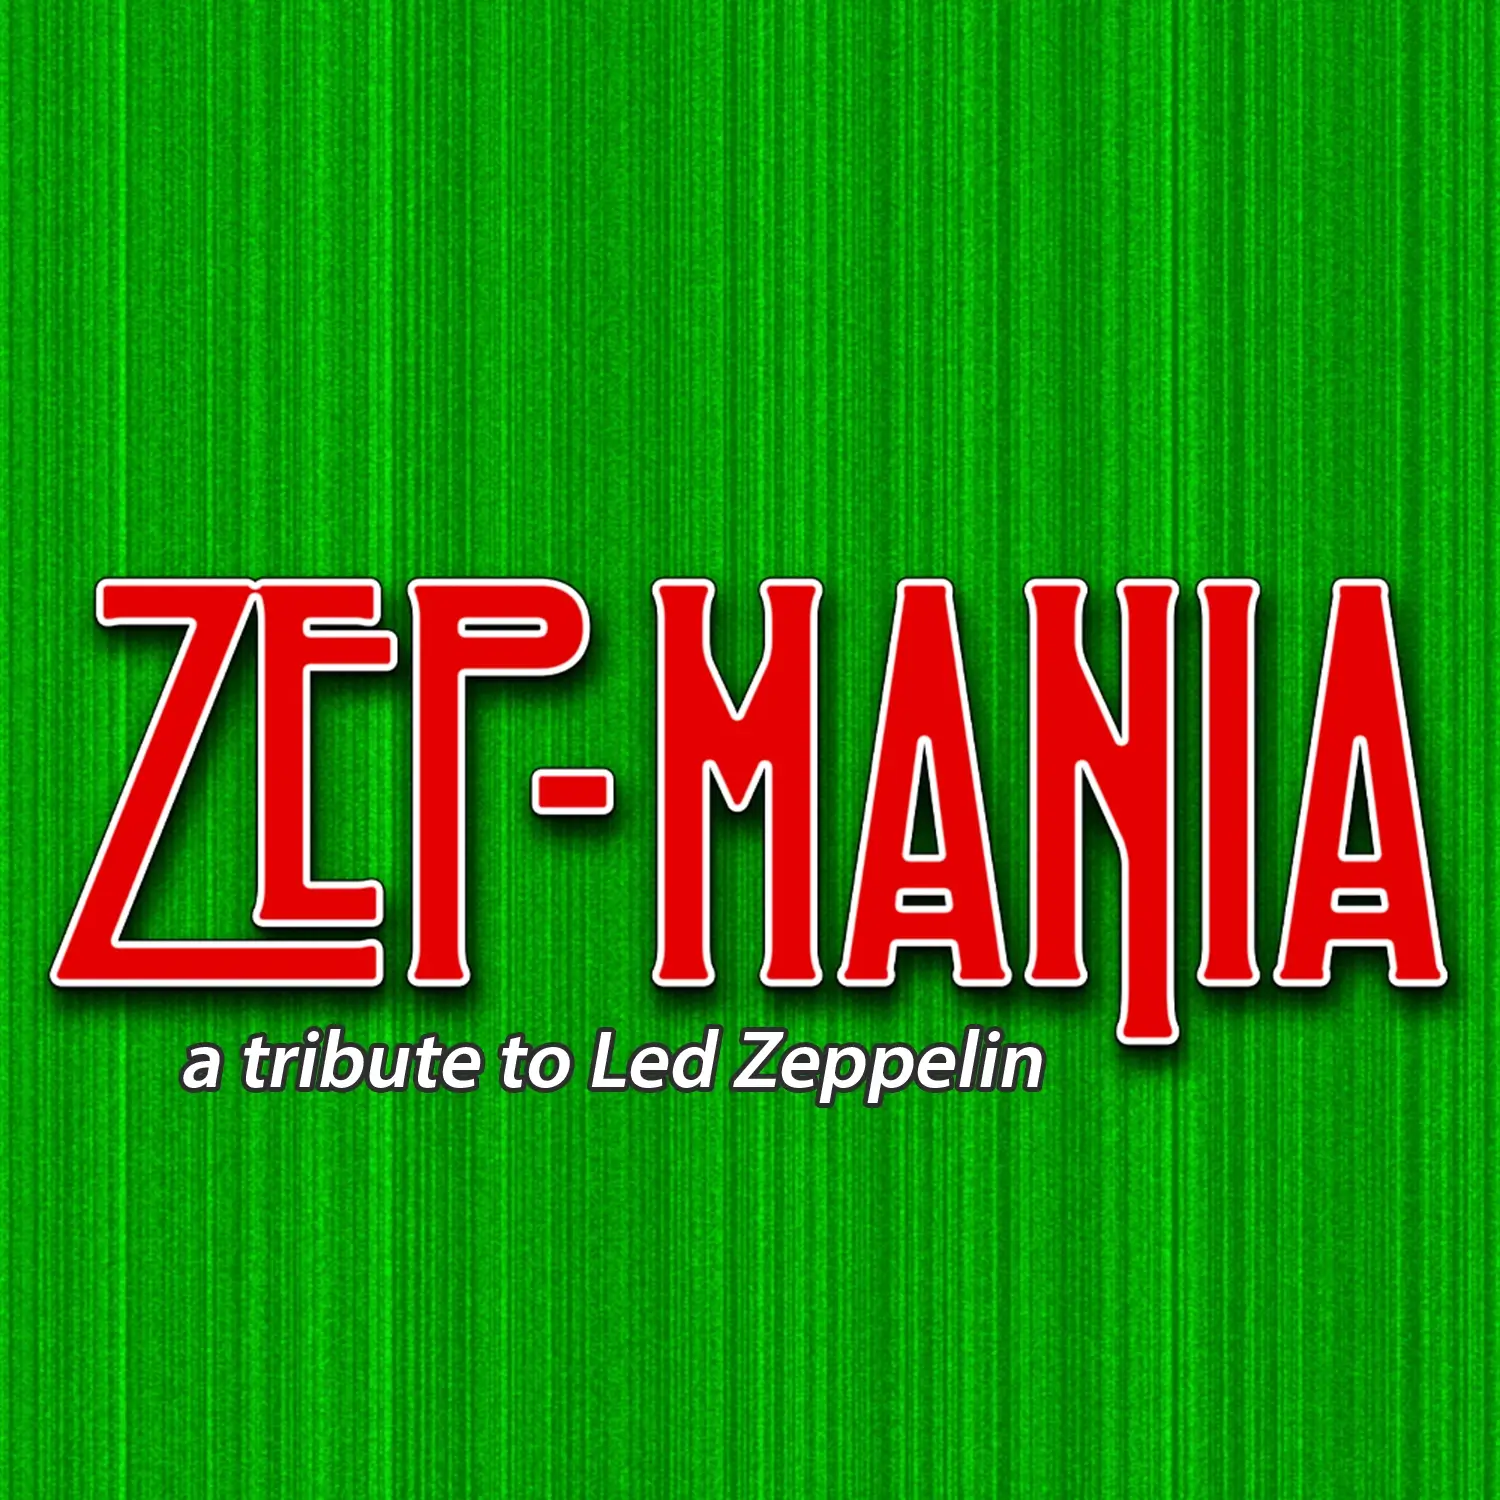 Zep Mania: a Tribute to Led Zeppelin